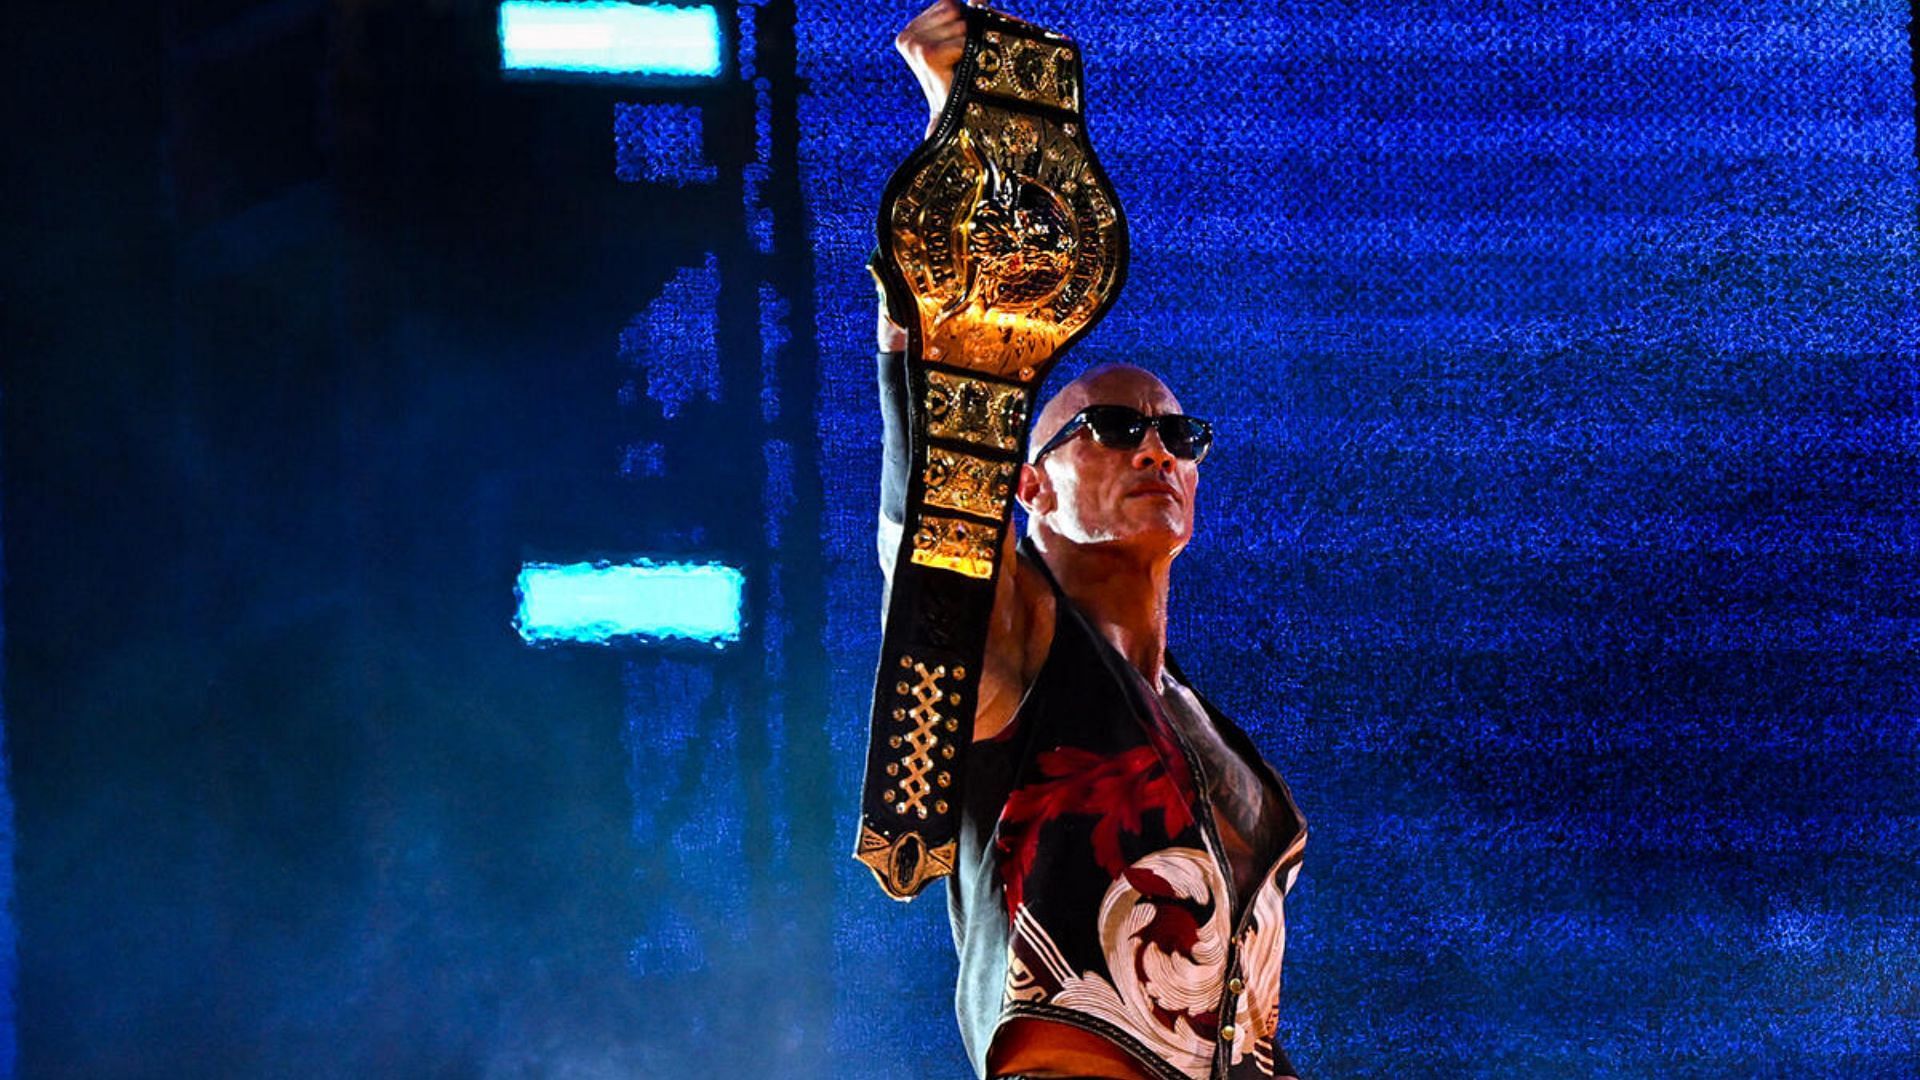 When will the Rock return to WWE?